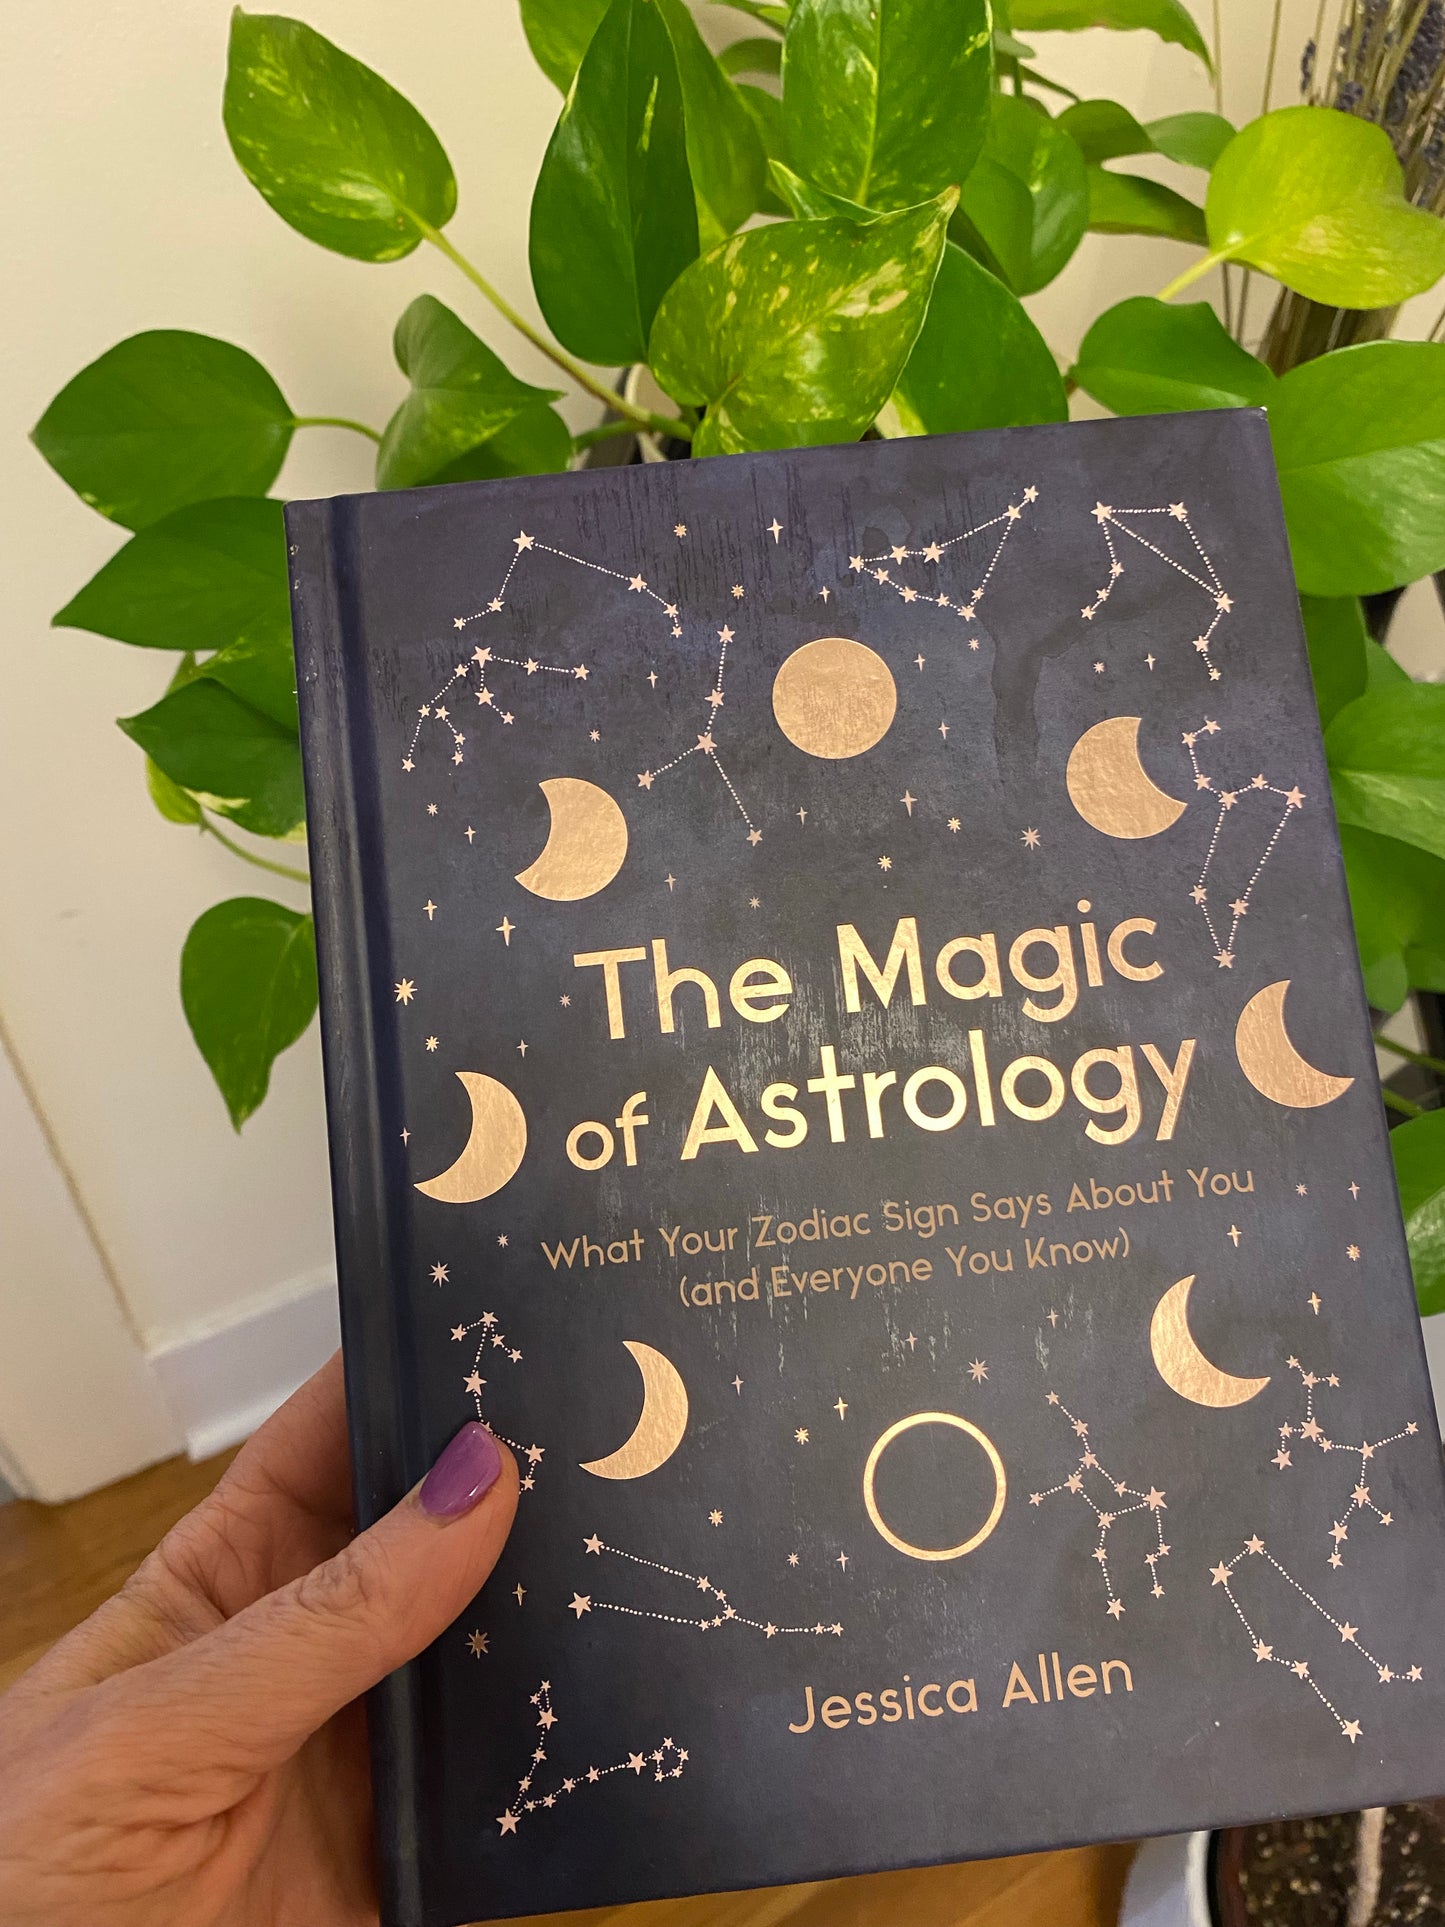 The Magic of Astrology WHAT YOUR ZODIAC SIGN SAYS ABOUT YOU (AND EVERYONE YOU KNOW) By Jessica Allen